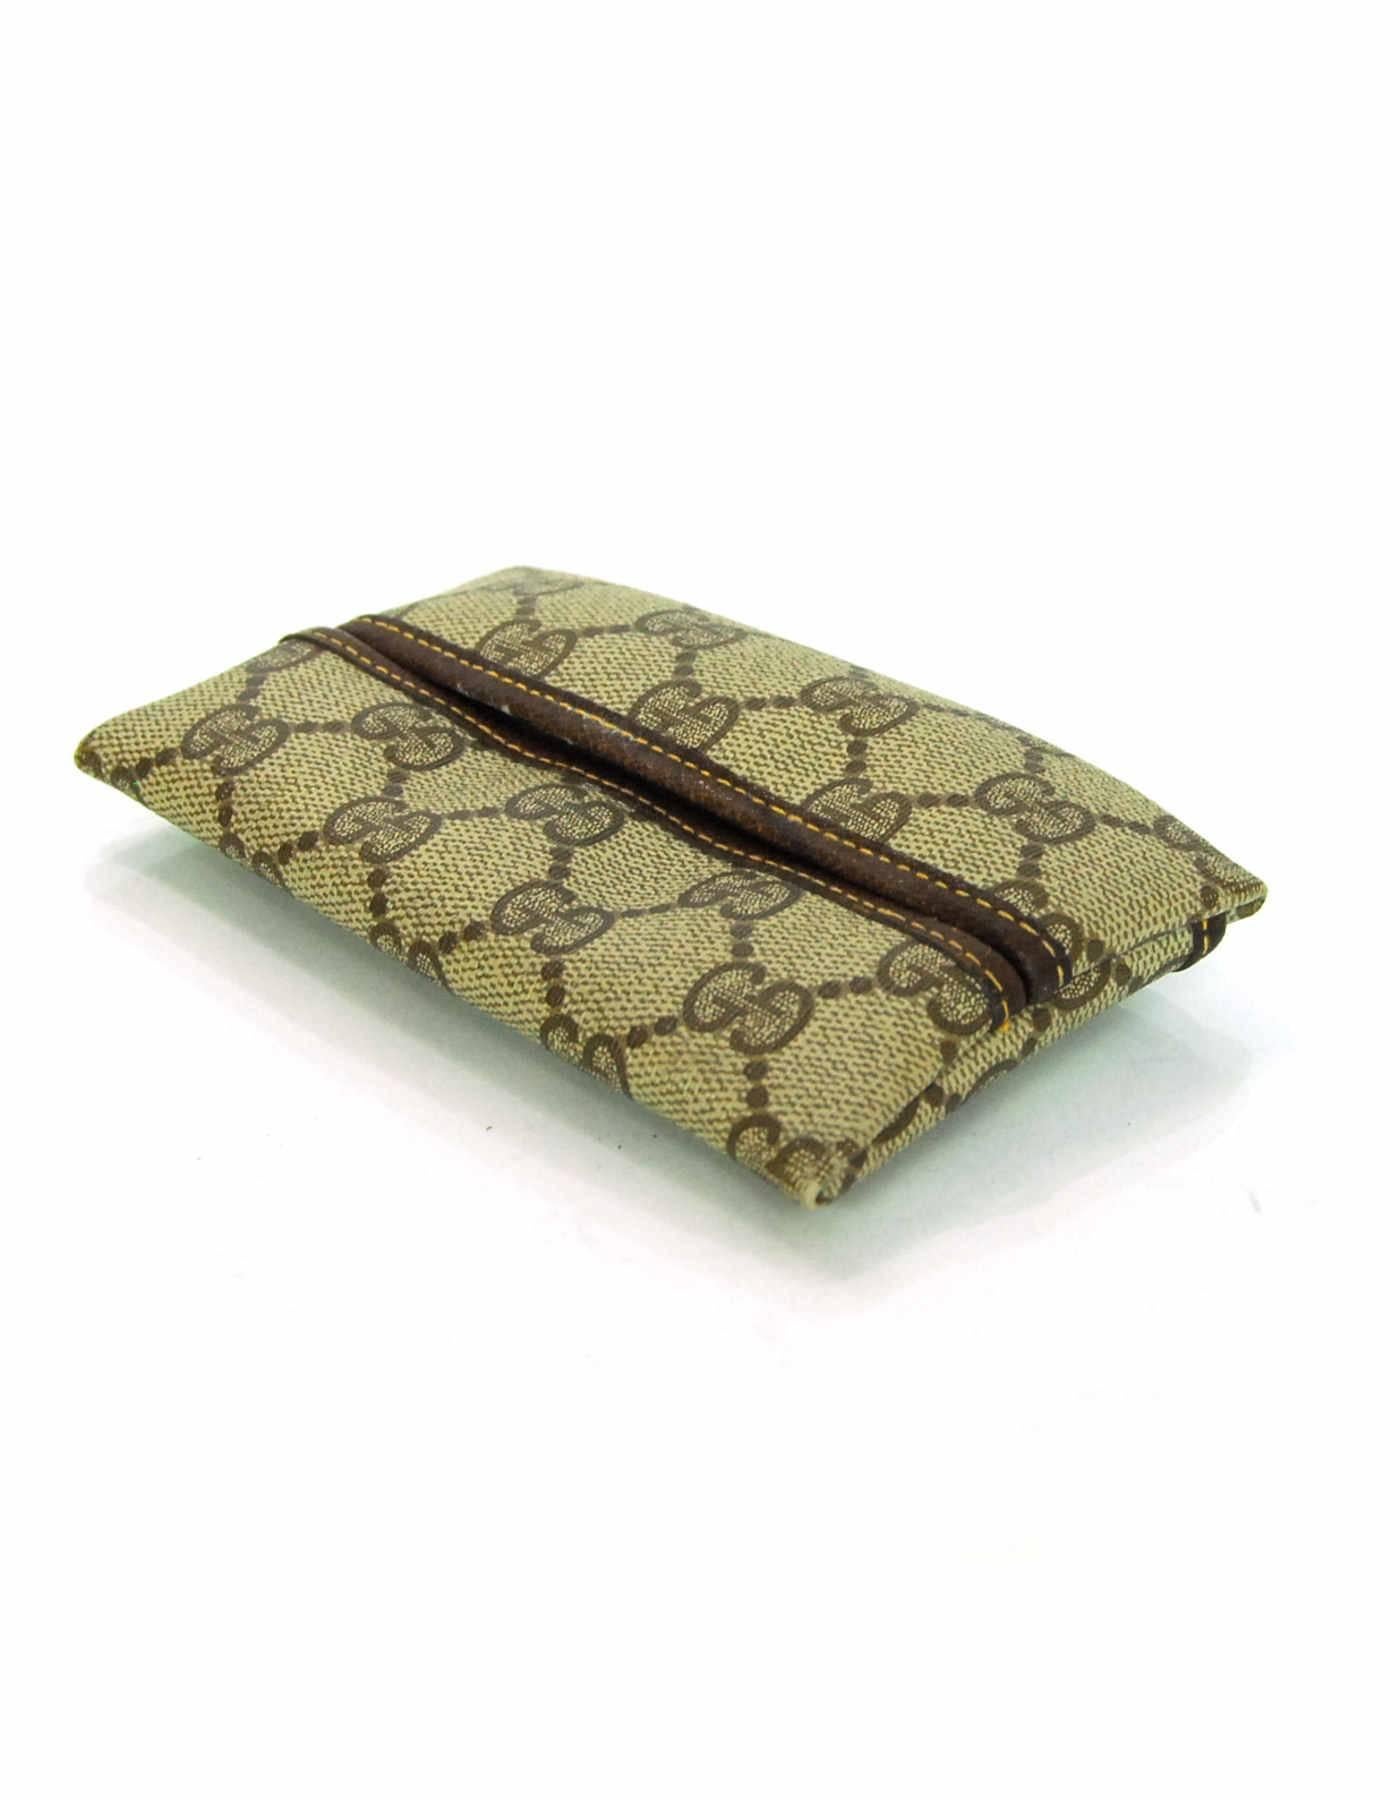 Gucci Vintage Tan Monogram Supreme Tissue Holder

Made In: Italy
Color: Tan, brown
Materials: Coated canvas, leather
Lining: Brown textile
Closure/Opening: Slit opening
Exterior Pockets: Flat pocket at back
Overall Condition: Very good vintage